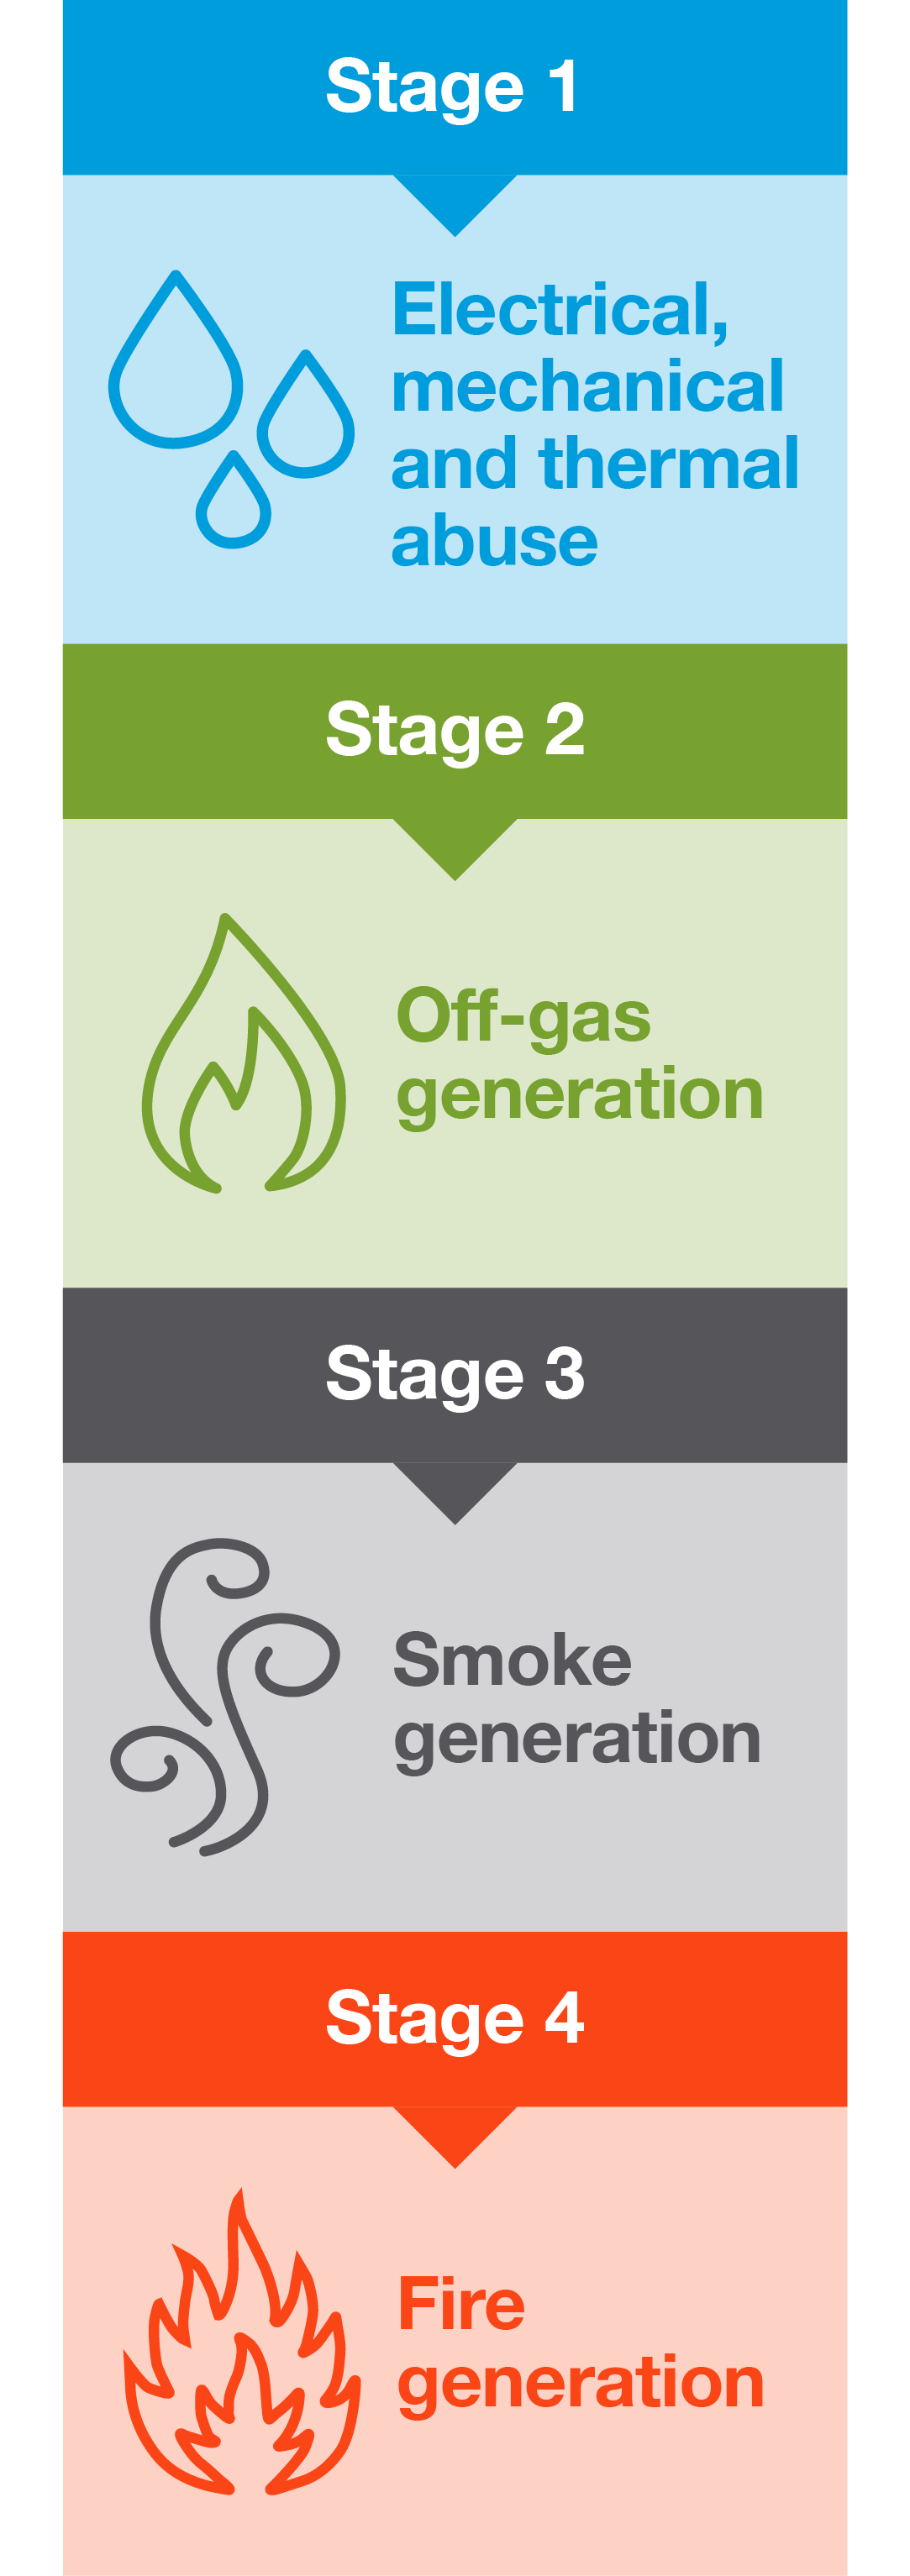 Stage 1: Electrical, mechanical and thermal abuse; Stage 2: Off-gas generation; Stage 3: Smoke generation; Stage 4: Fire generation